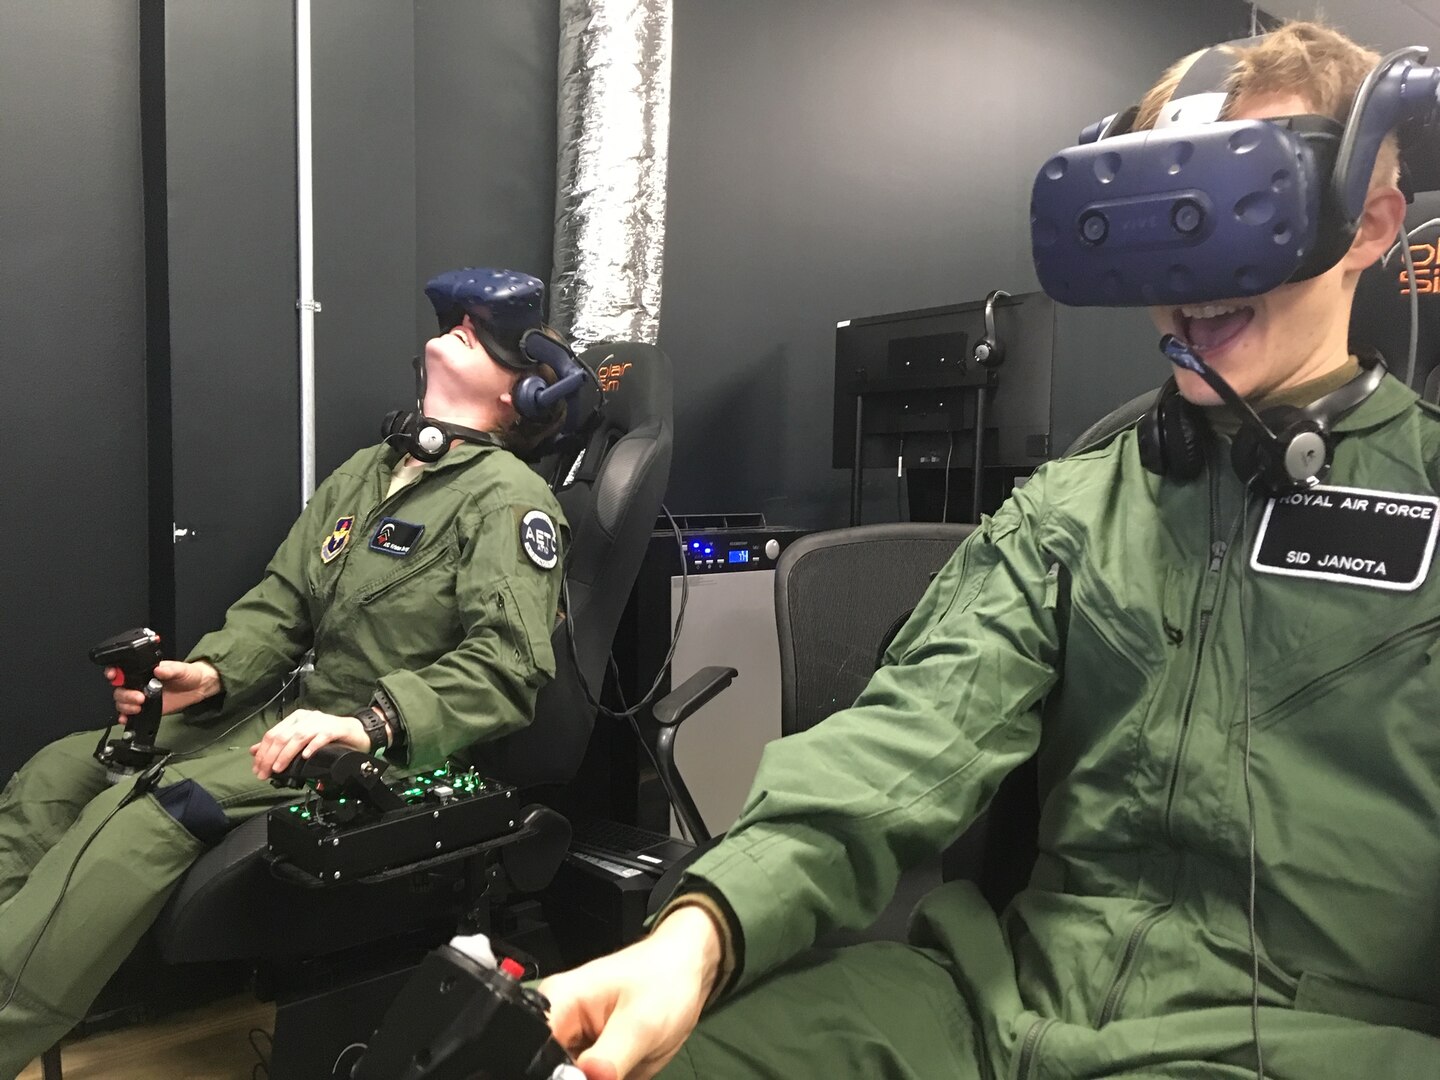 Two students in Pilot Training Next 2.0 fly a virtual-reality training sortie Jan. 18, 2019, at the Armed Forces Reserve Center, located near the Austin-Bergstrom International Airport in Austin, Texas. The instruction in this second version is shaped from the success of and lessons learned from the first PTN program, where 13 officers graduated in June 2018 and progressed to advanced training across multiple platforms. (U.S. Air Force photo/1Lt Geneva Giaimo)